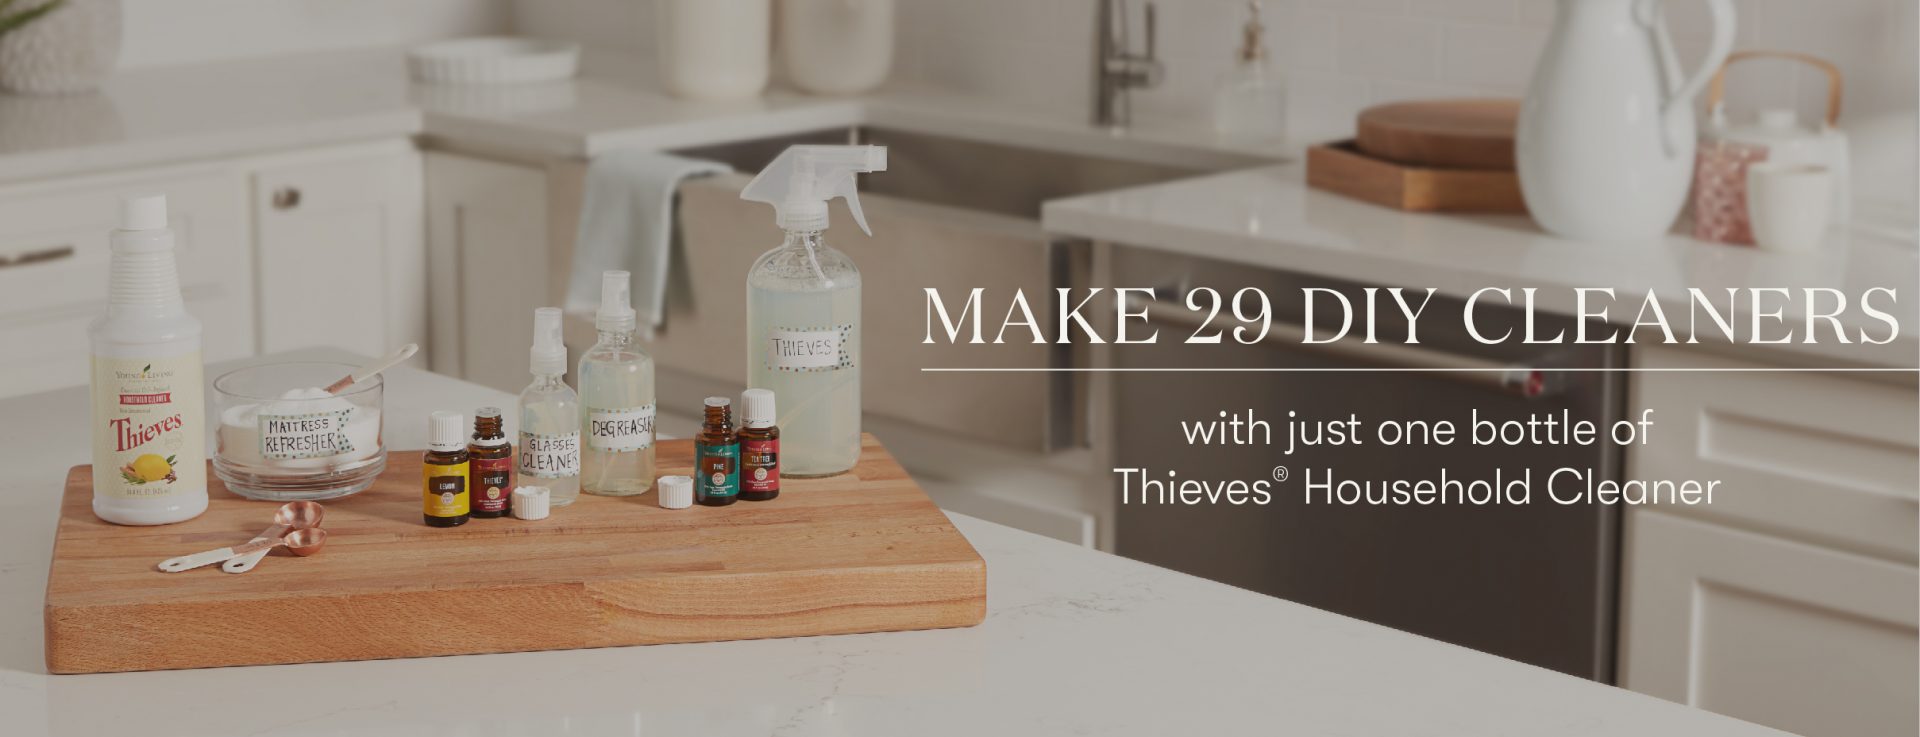 https://www.youngliving.com/blog/wp-content/uploads/2020/11/blog-Q4-Reposts-November-2020-Make-29-DIY-cleaners-with-just-one-bottle-of-Thieves-Household-Cleaner_Header_US.jpg